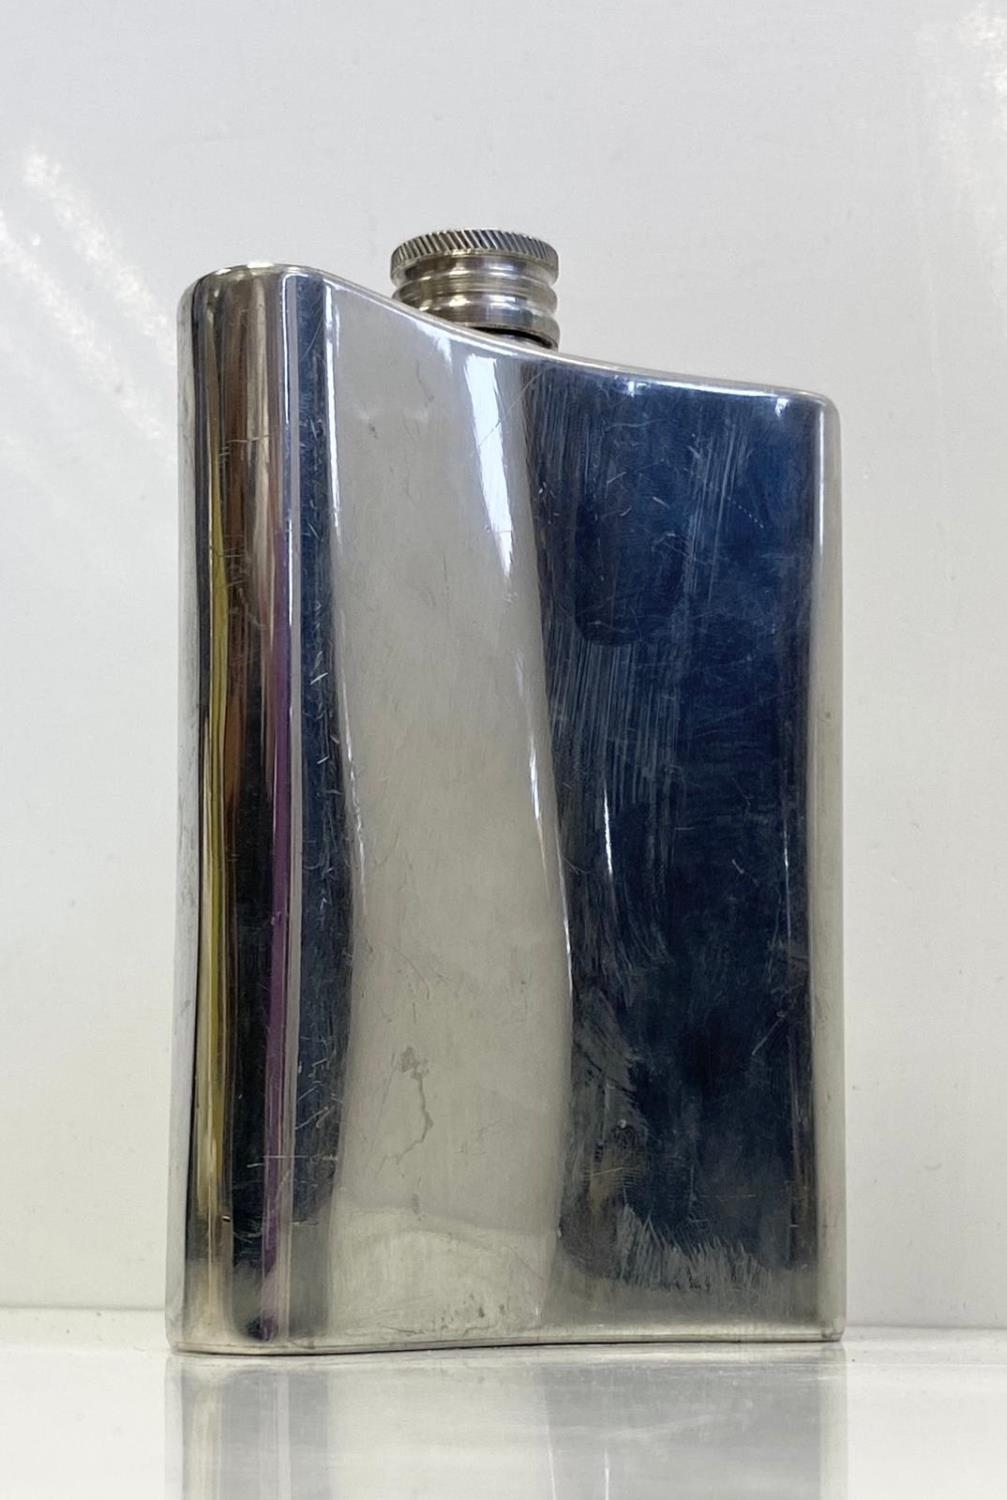 Pewter hip flask. Size 15cm x 8cm. - Image 2 of 3